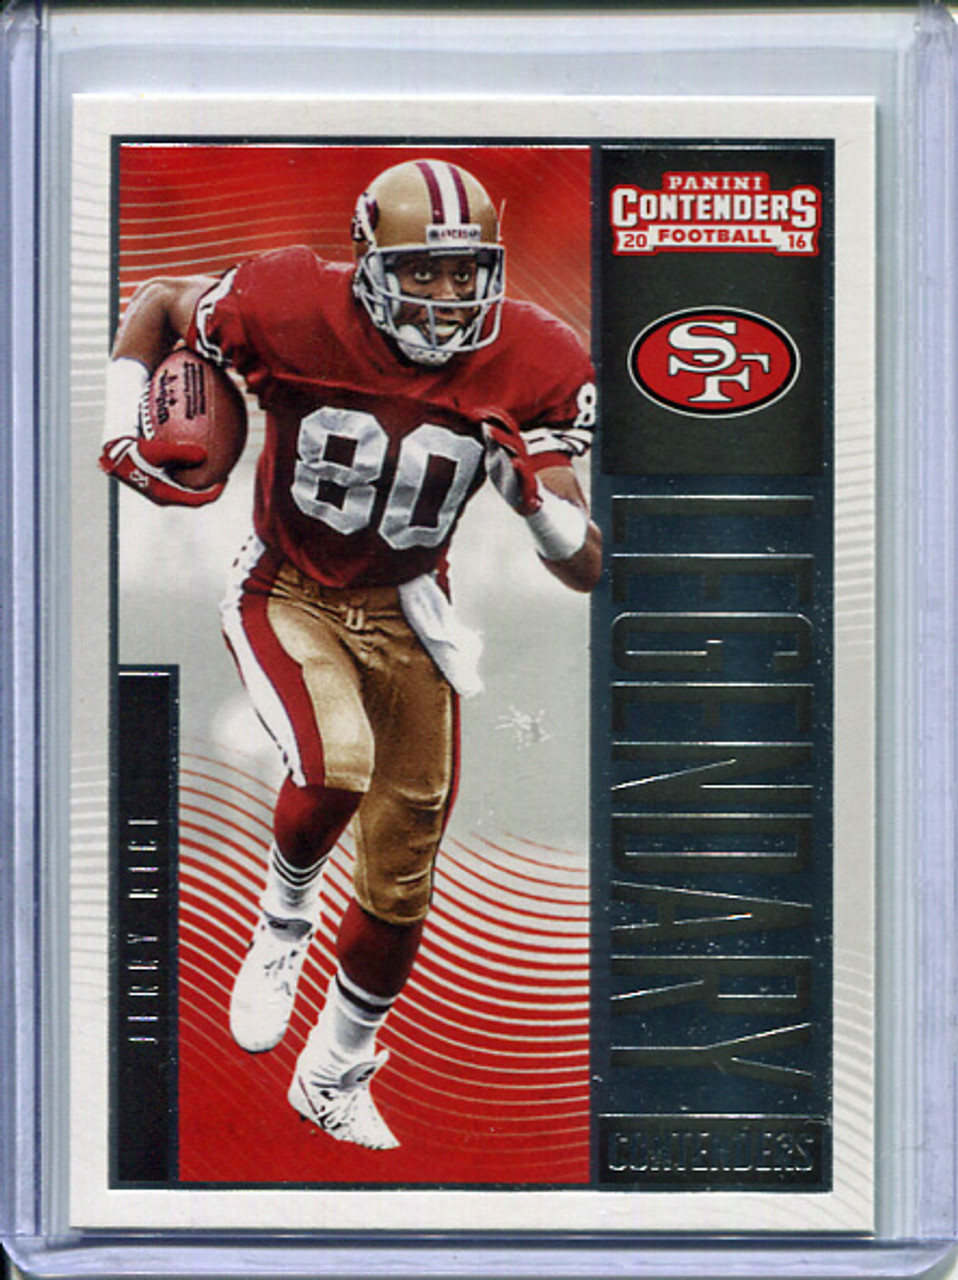 Jerry Rice 2016 Contenders, Legendary Contenders #2